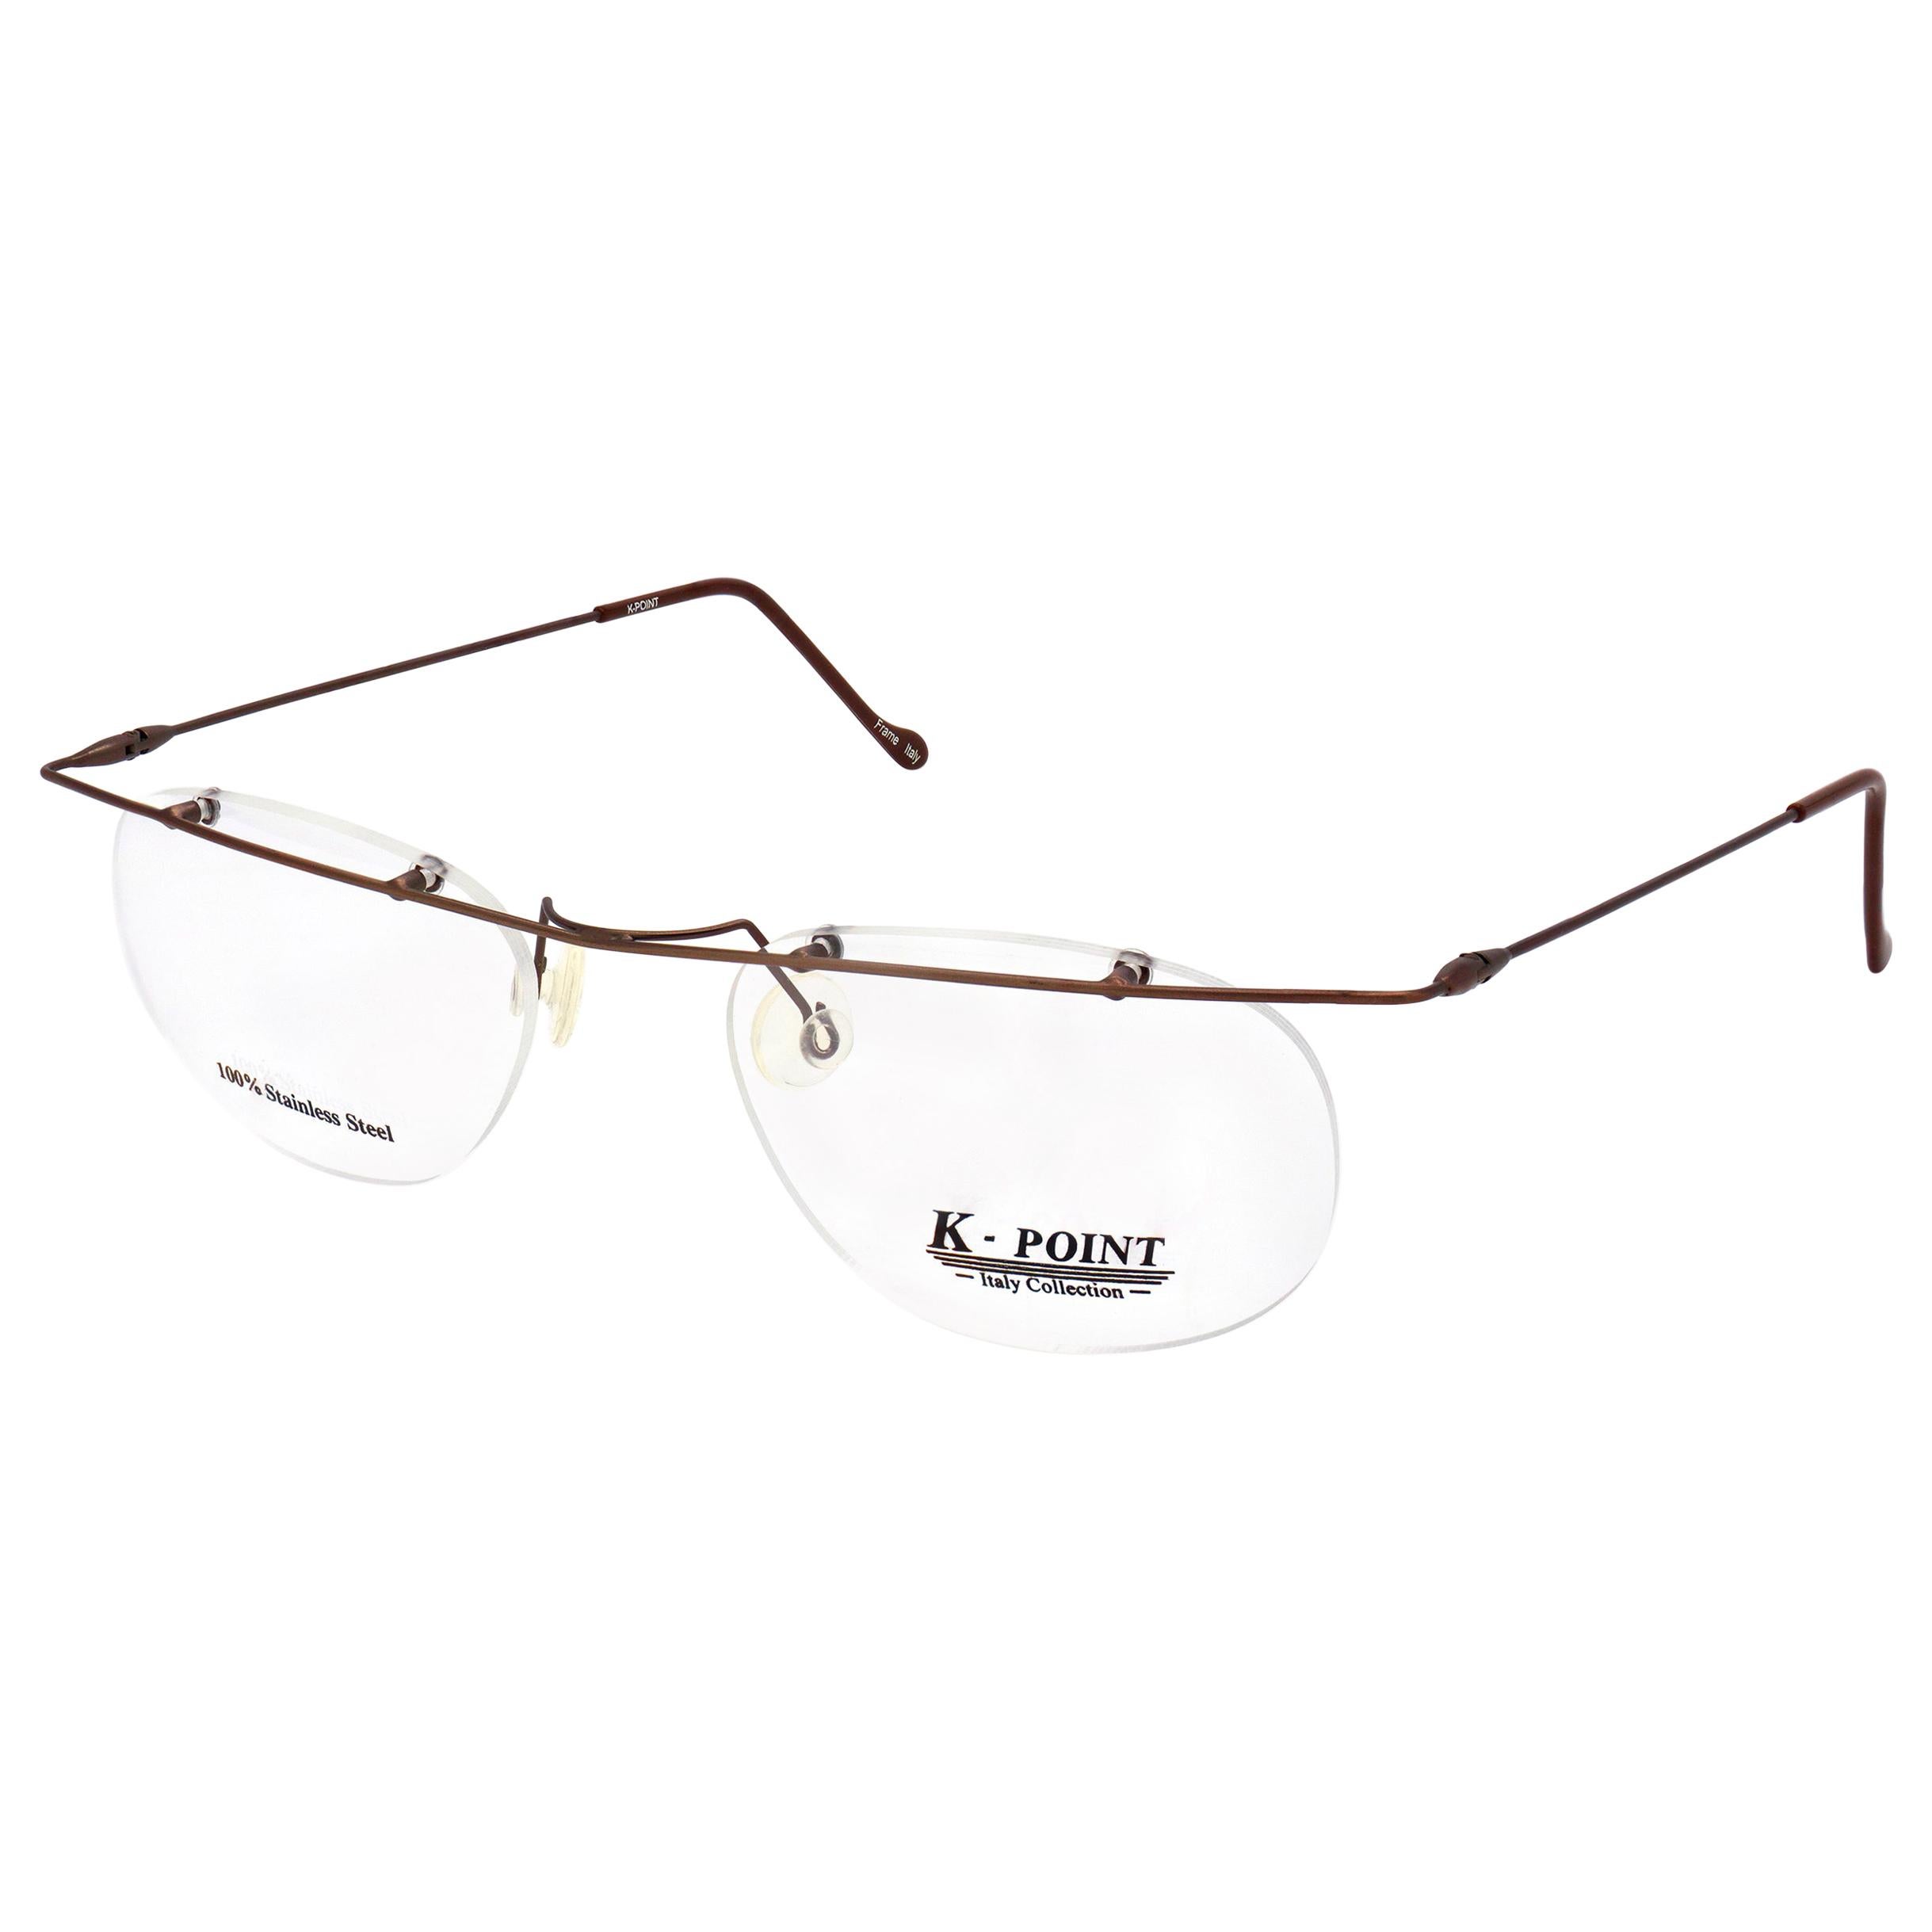 K-Point vintage rimless eyeglass frame, made in Italy For Sale